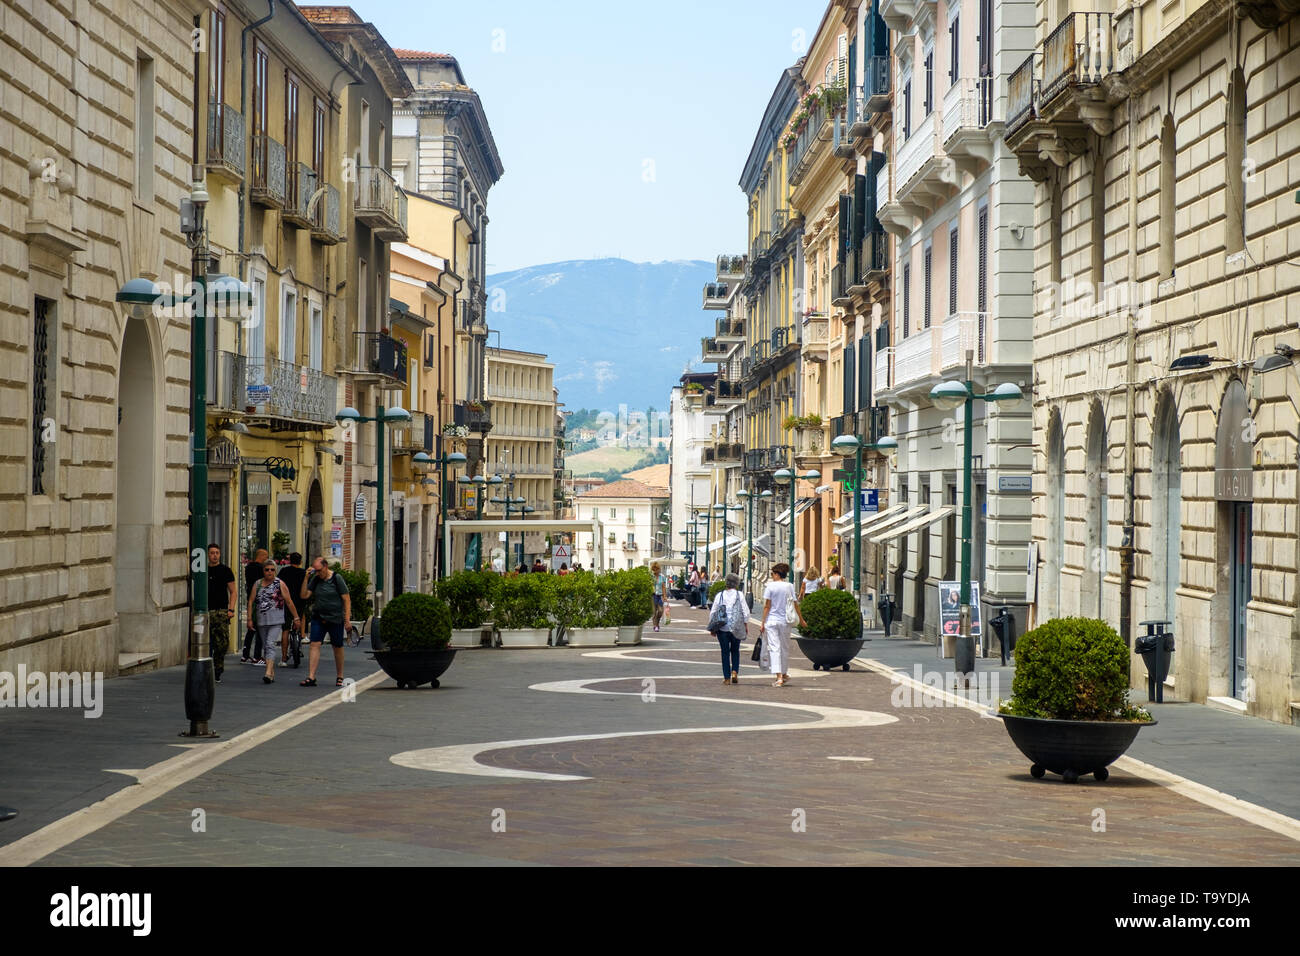 'Corso Garibaldi' is the main road of Benevento and forms the heart of the historical center. In the background lie the hills of the countryside. Stock Photo